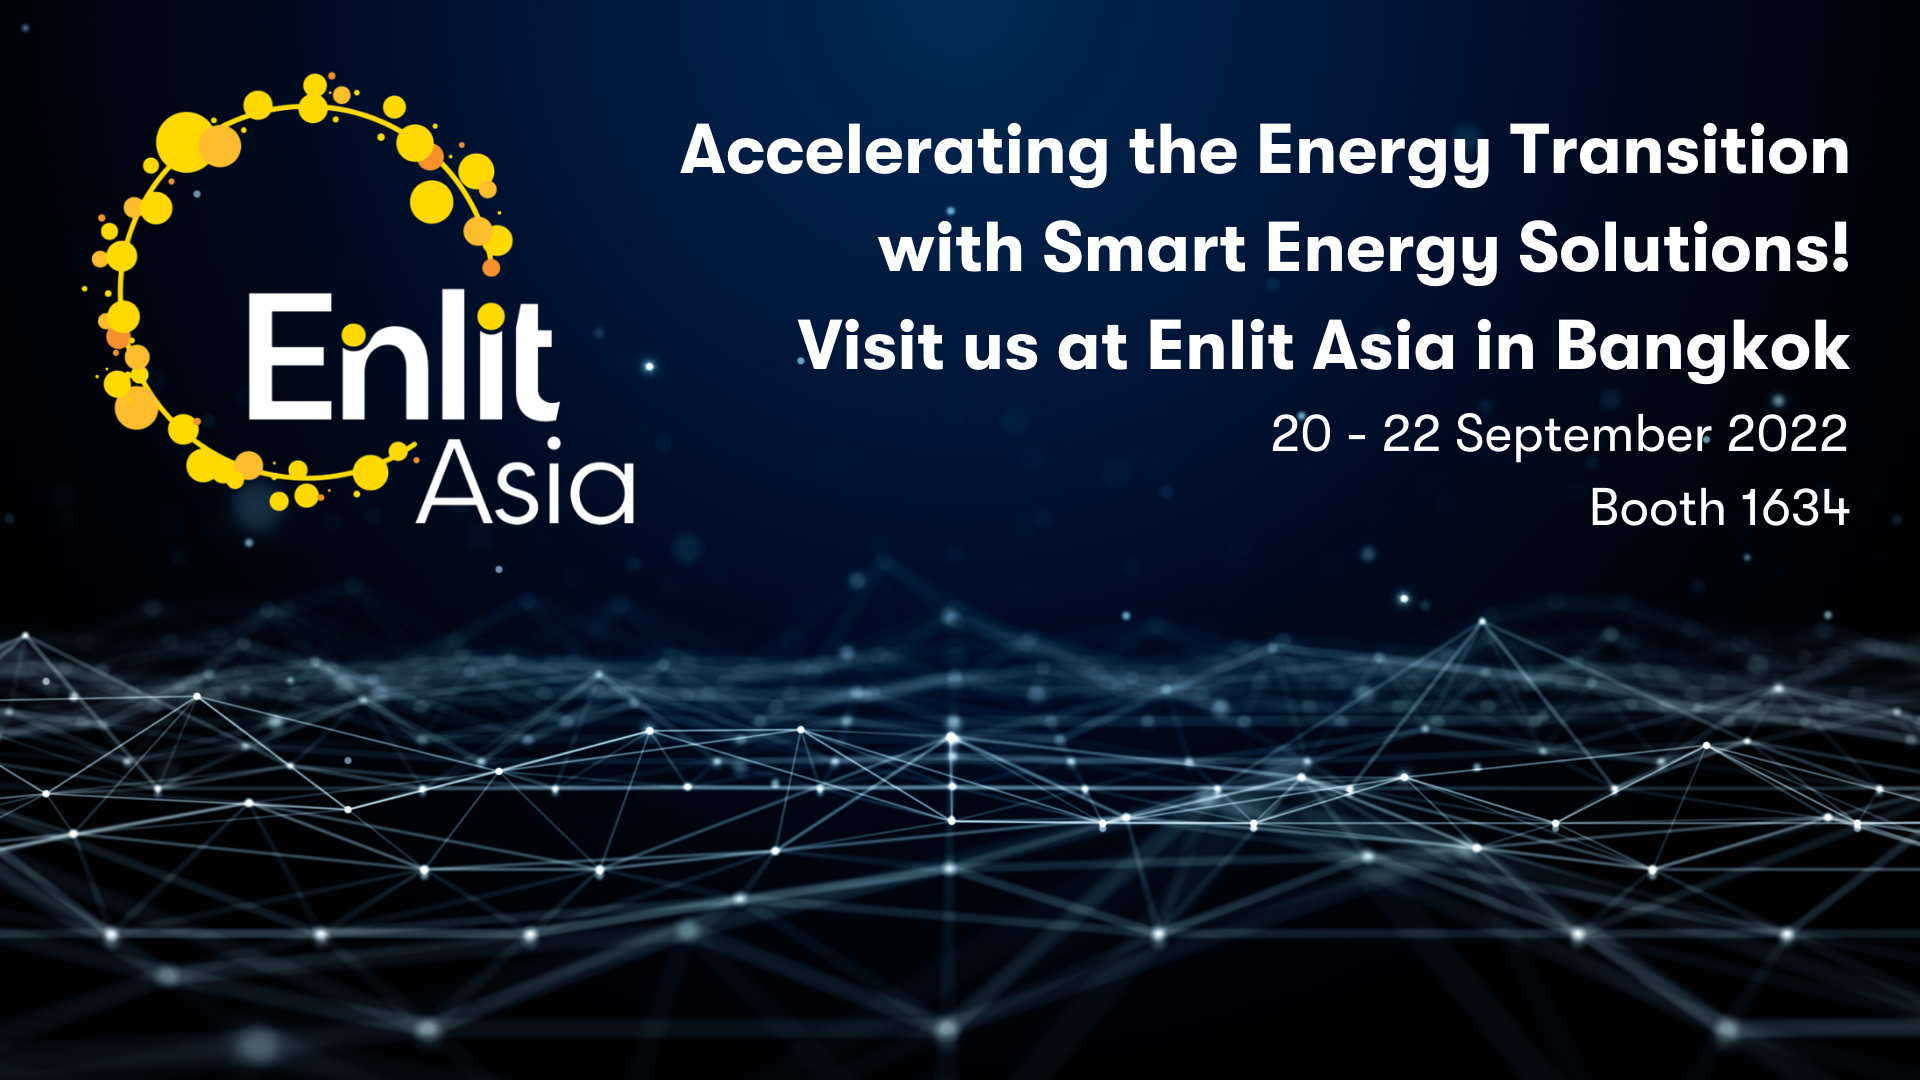 uploads/pics/https://technischerservice.iqony.energy/uploads/pics/Accelerating_the_Energy_Transition_with_Smart_Digital_Solutions_Visit_us_at_Enlit_Asia_in_Bangkok__1__07.png